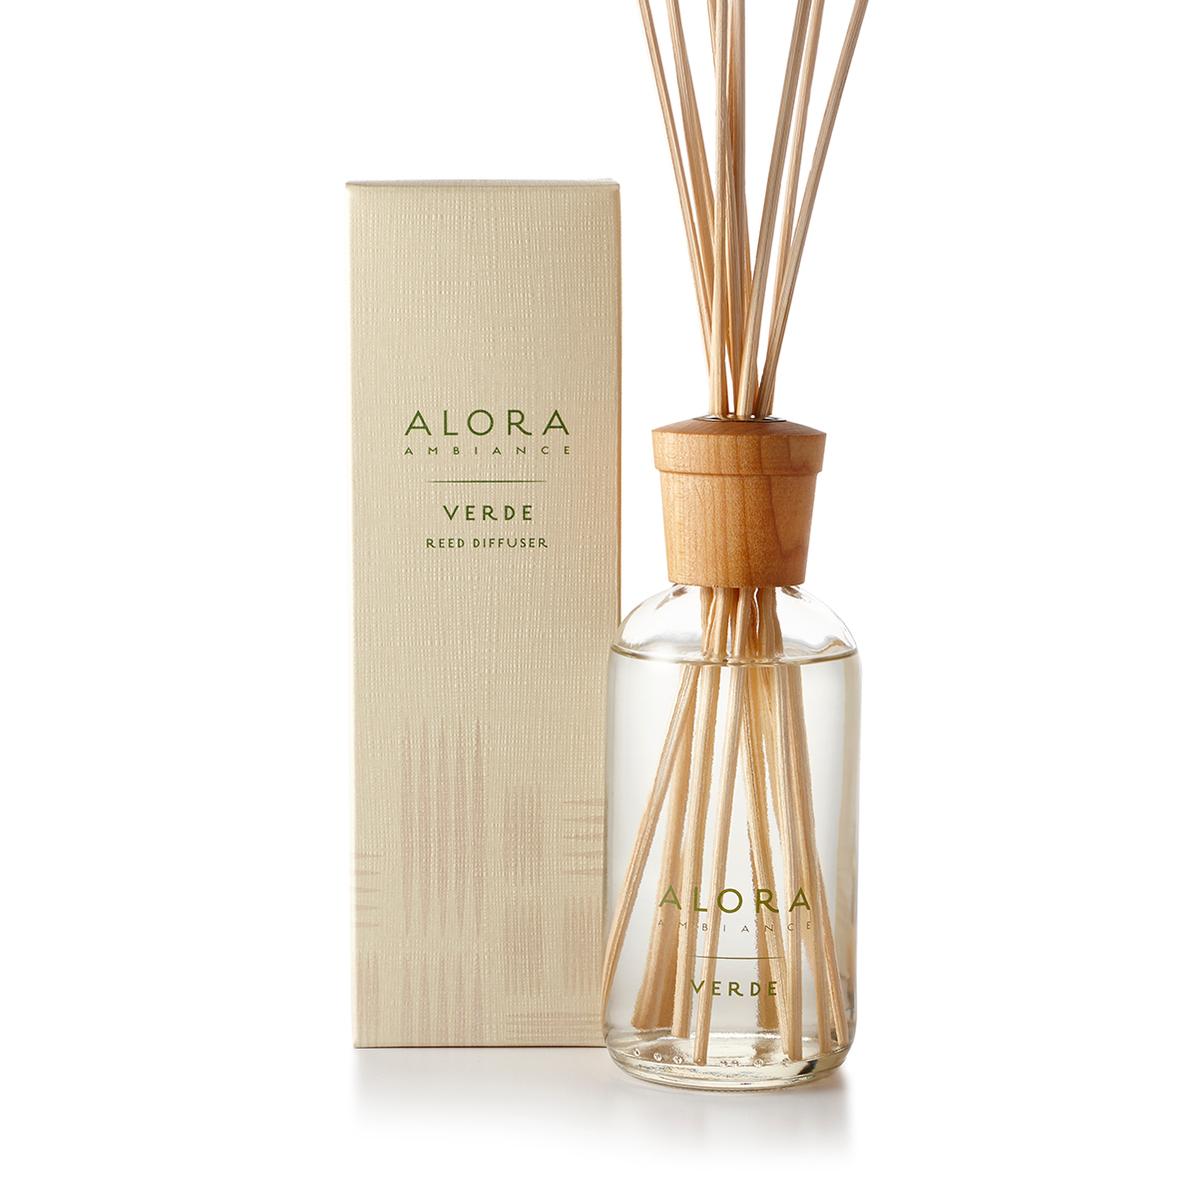 Primary image of Verde Reed Diffuser